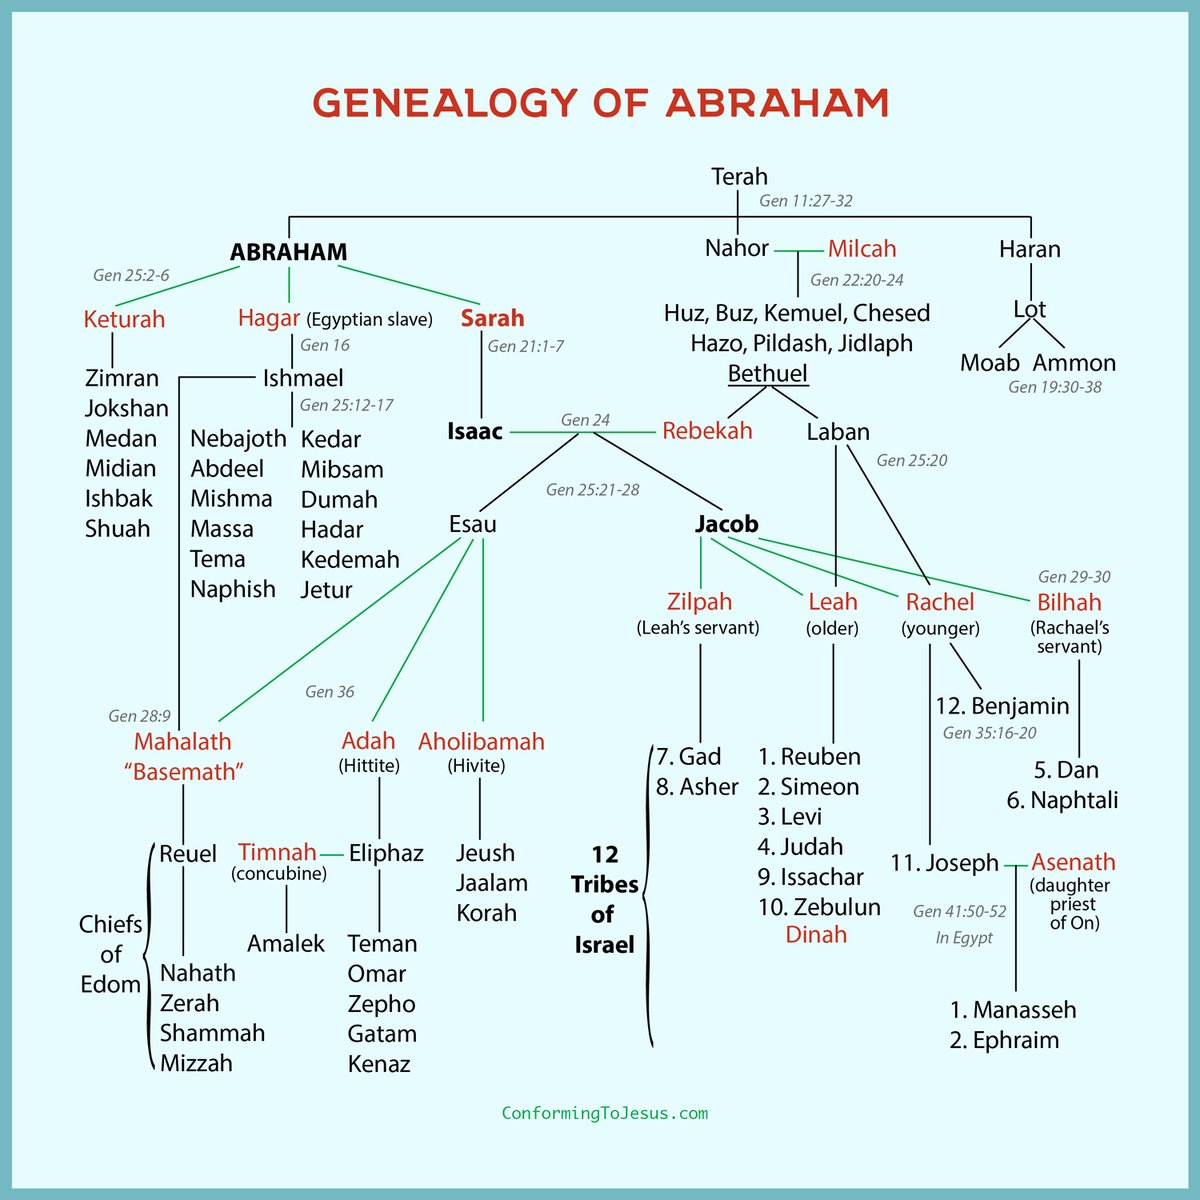 3-Most "JewISH" ppl in Israel now r Ashkenazi, Sephardic, etc. They are NOT SEMITIC4-The word "Jew" DERIVES from Biblical word "Judah". Judah was 1 of Israel's (Jacob) sons. Jacob was descendant of Shem. AGAIN, these "JewISH" ppl today are not Shemitic, let alone real Jews.